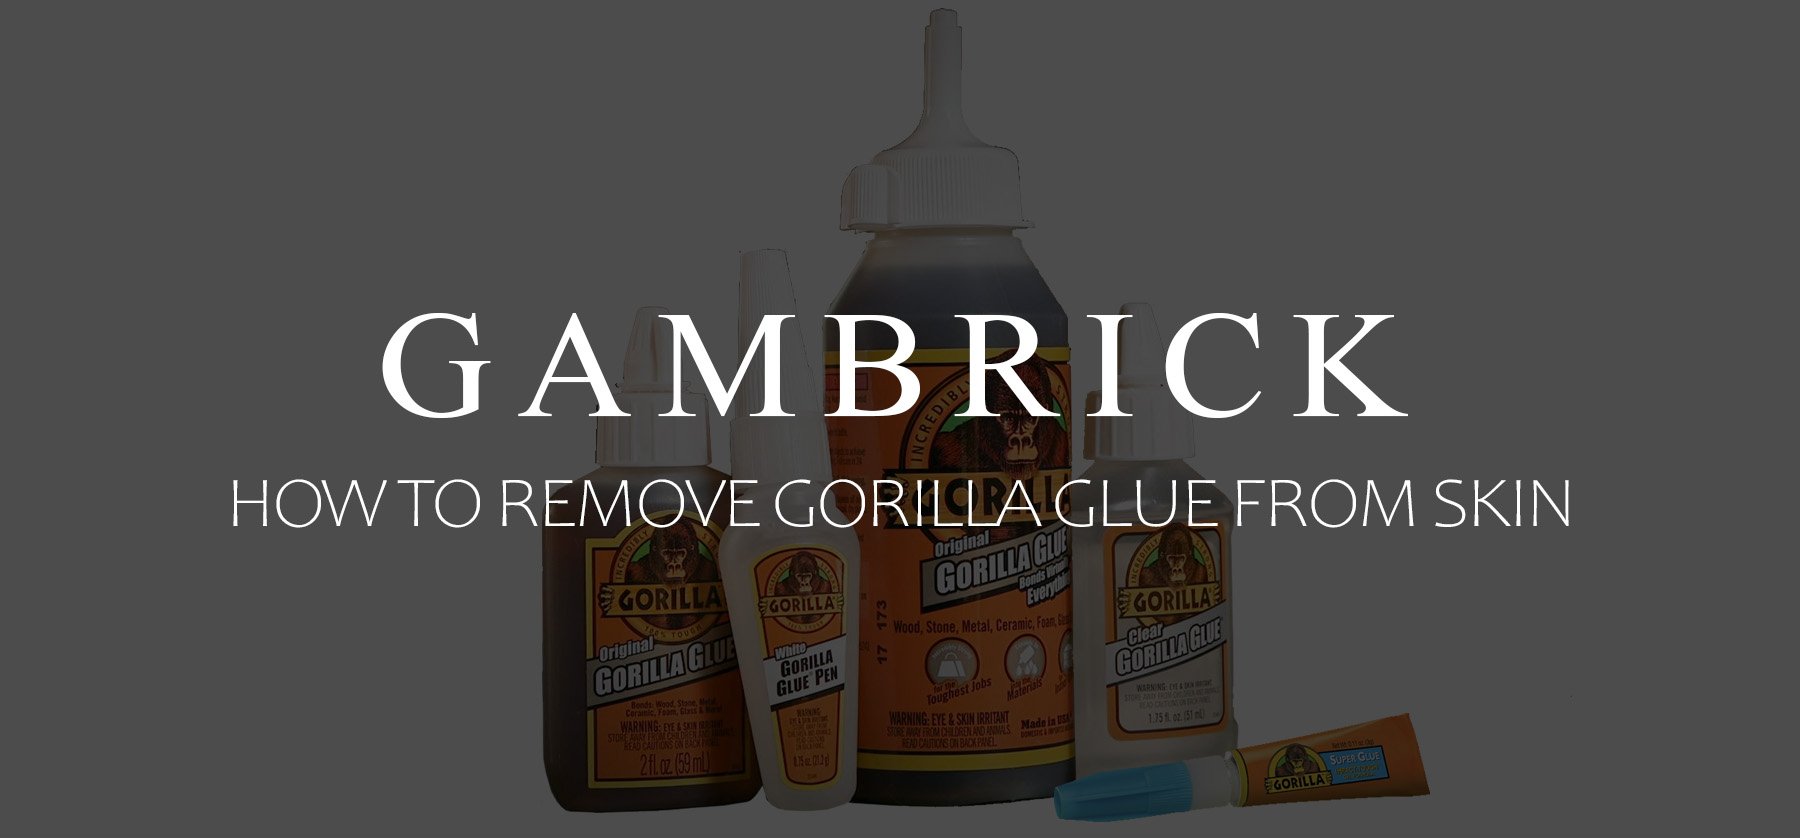 how to remove gorilla glue from skin banner 1.0